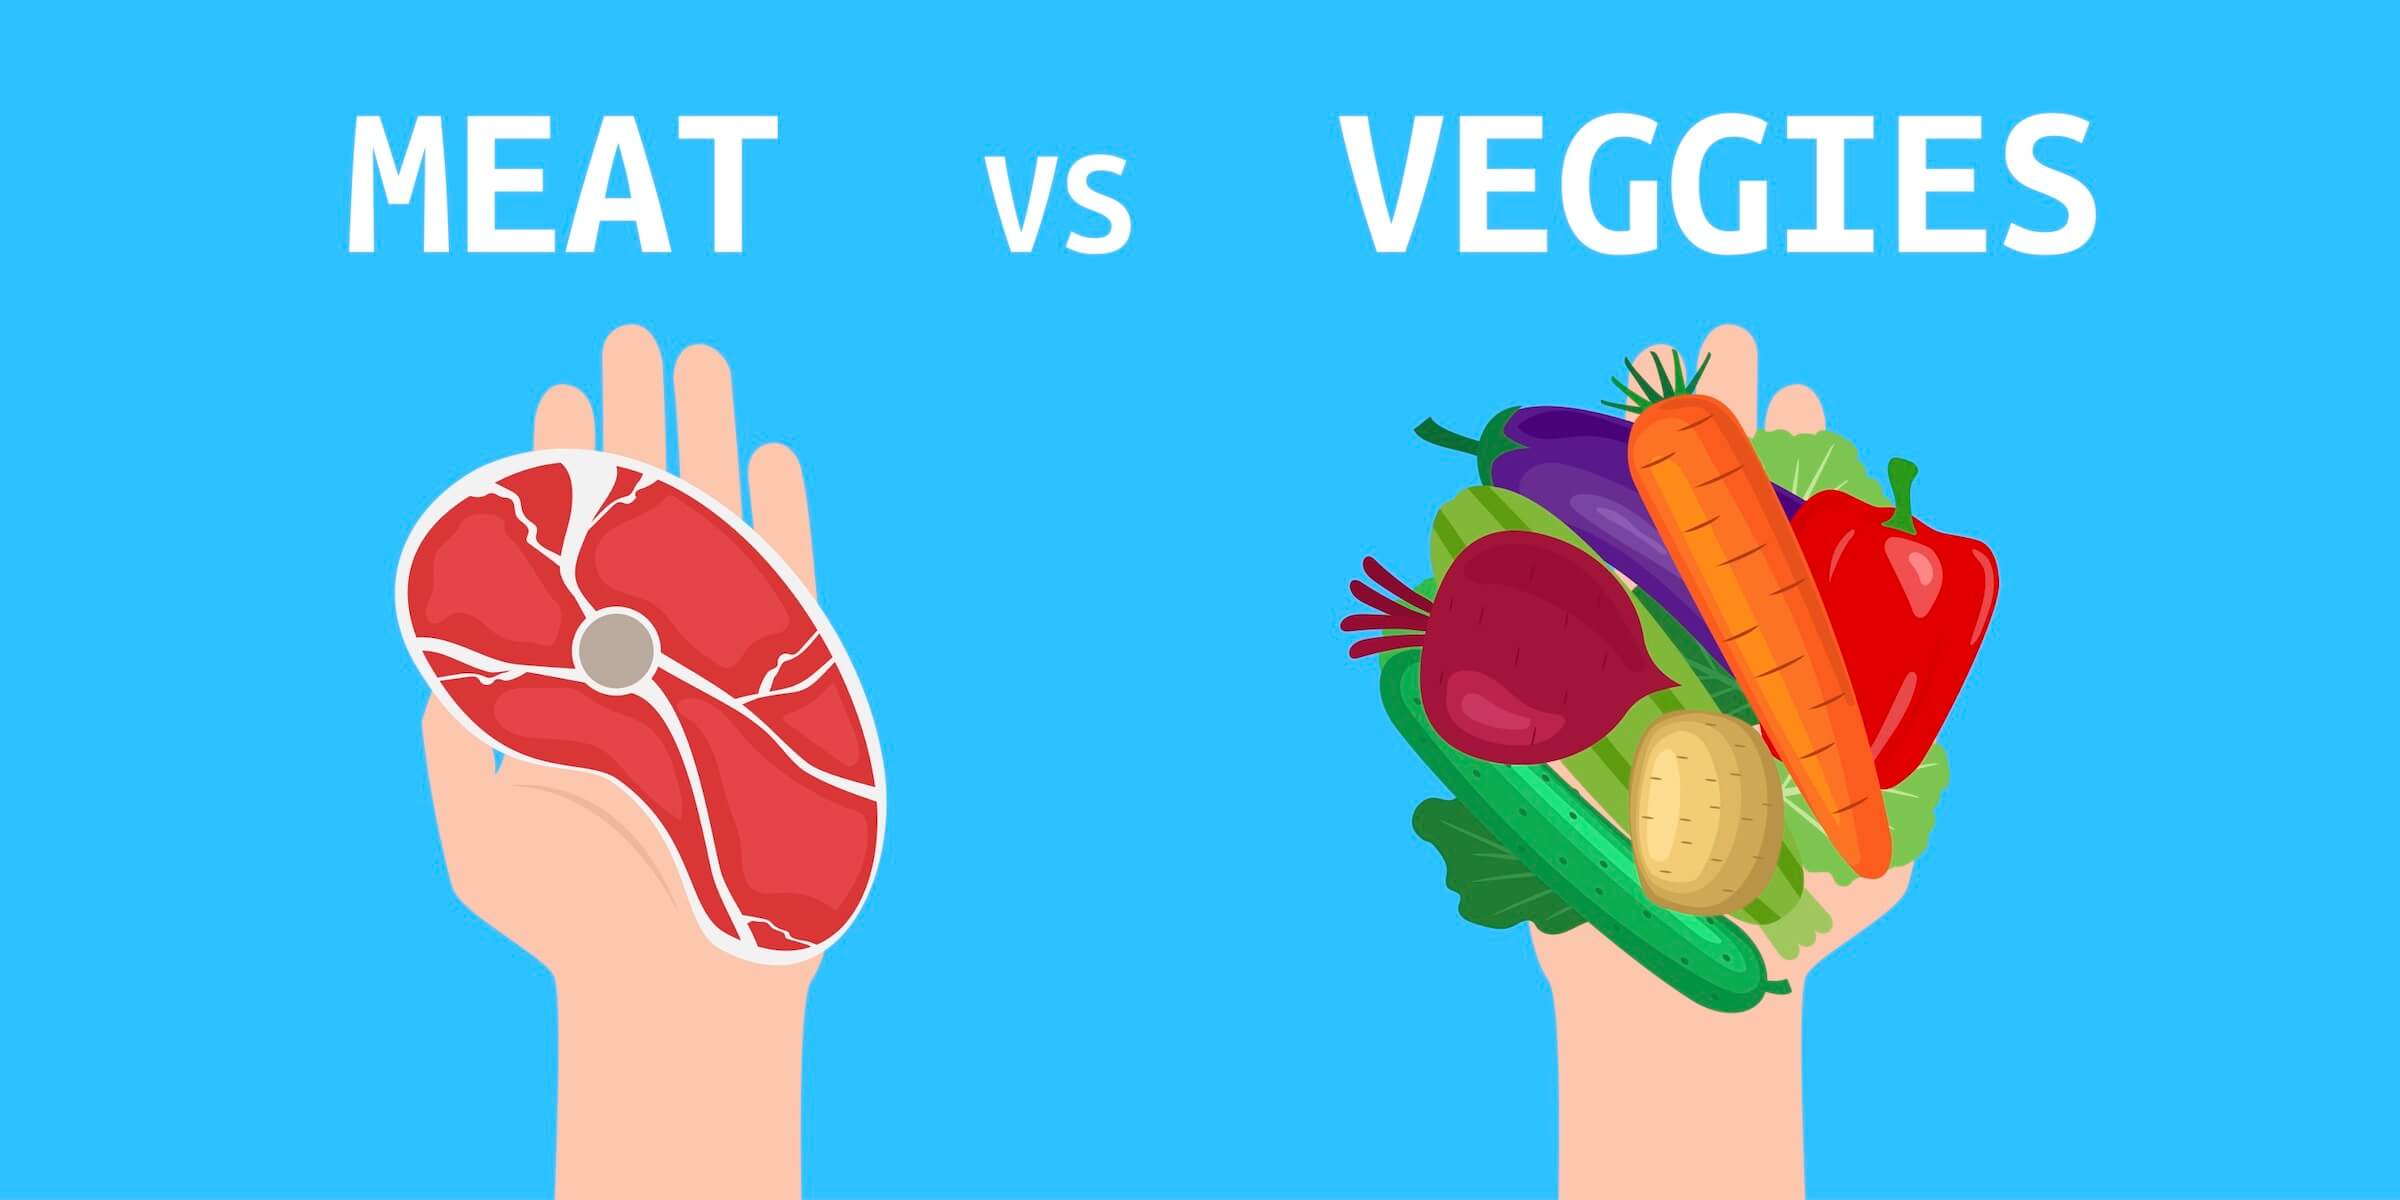 Why You Should Not Eat Veggies